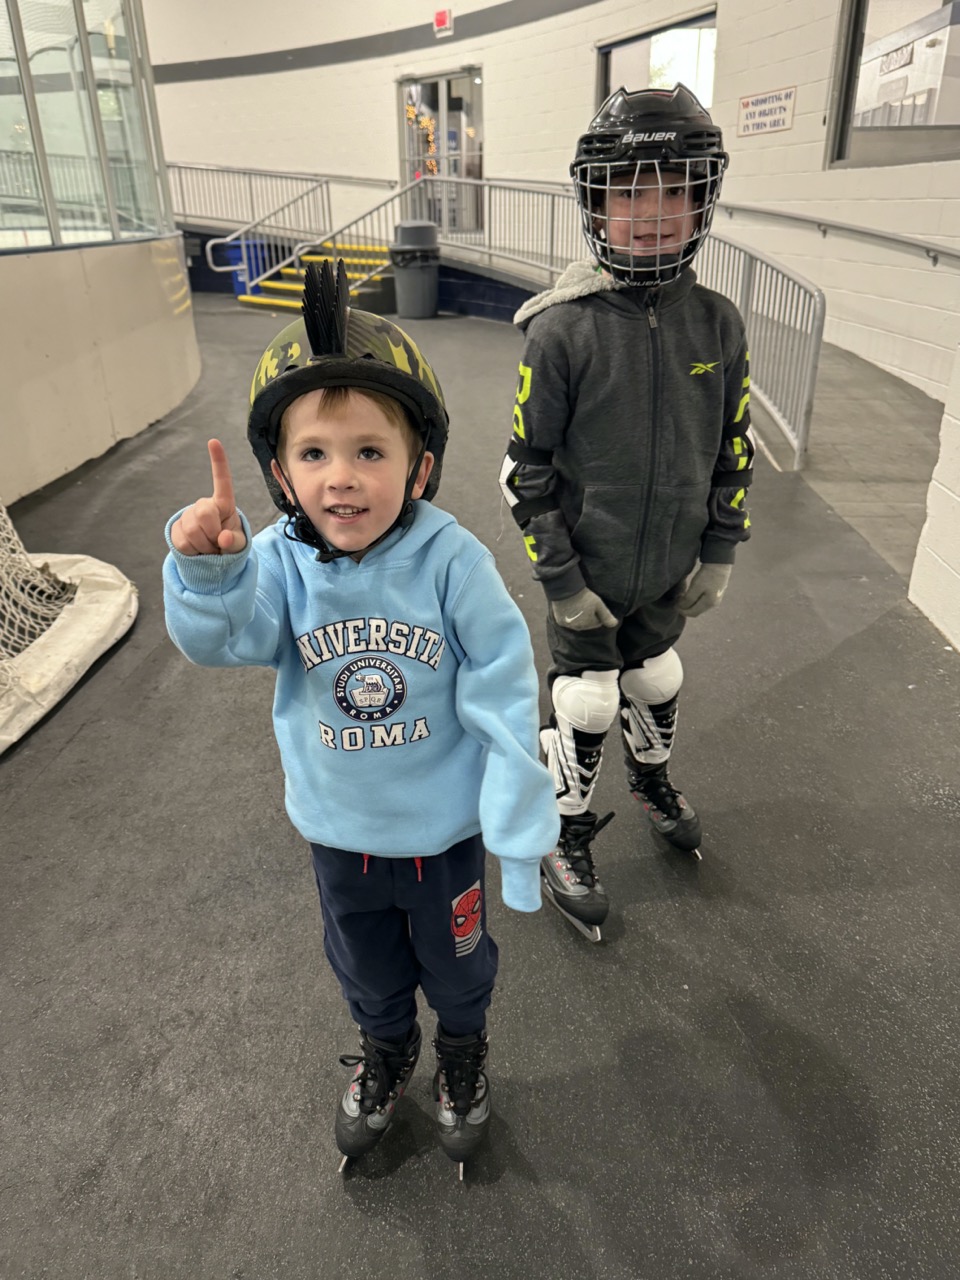 Took my boys ice skating for the first time